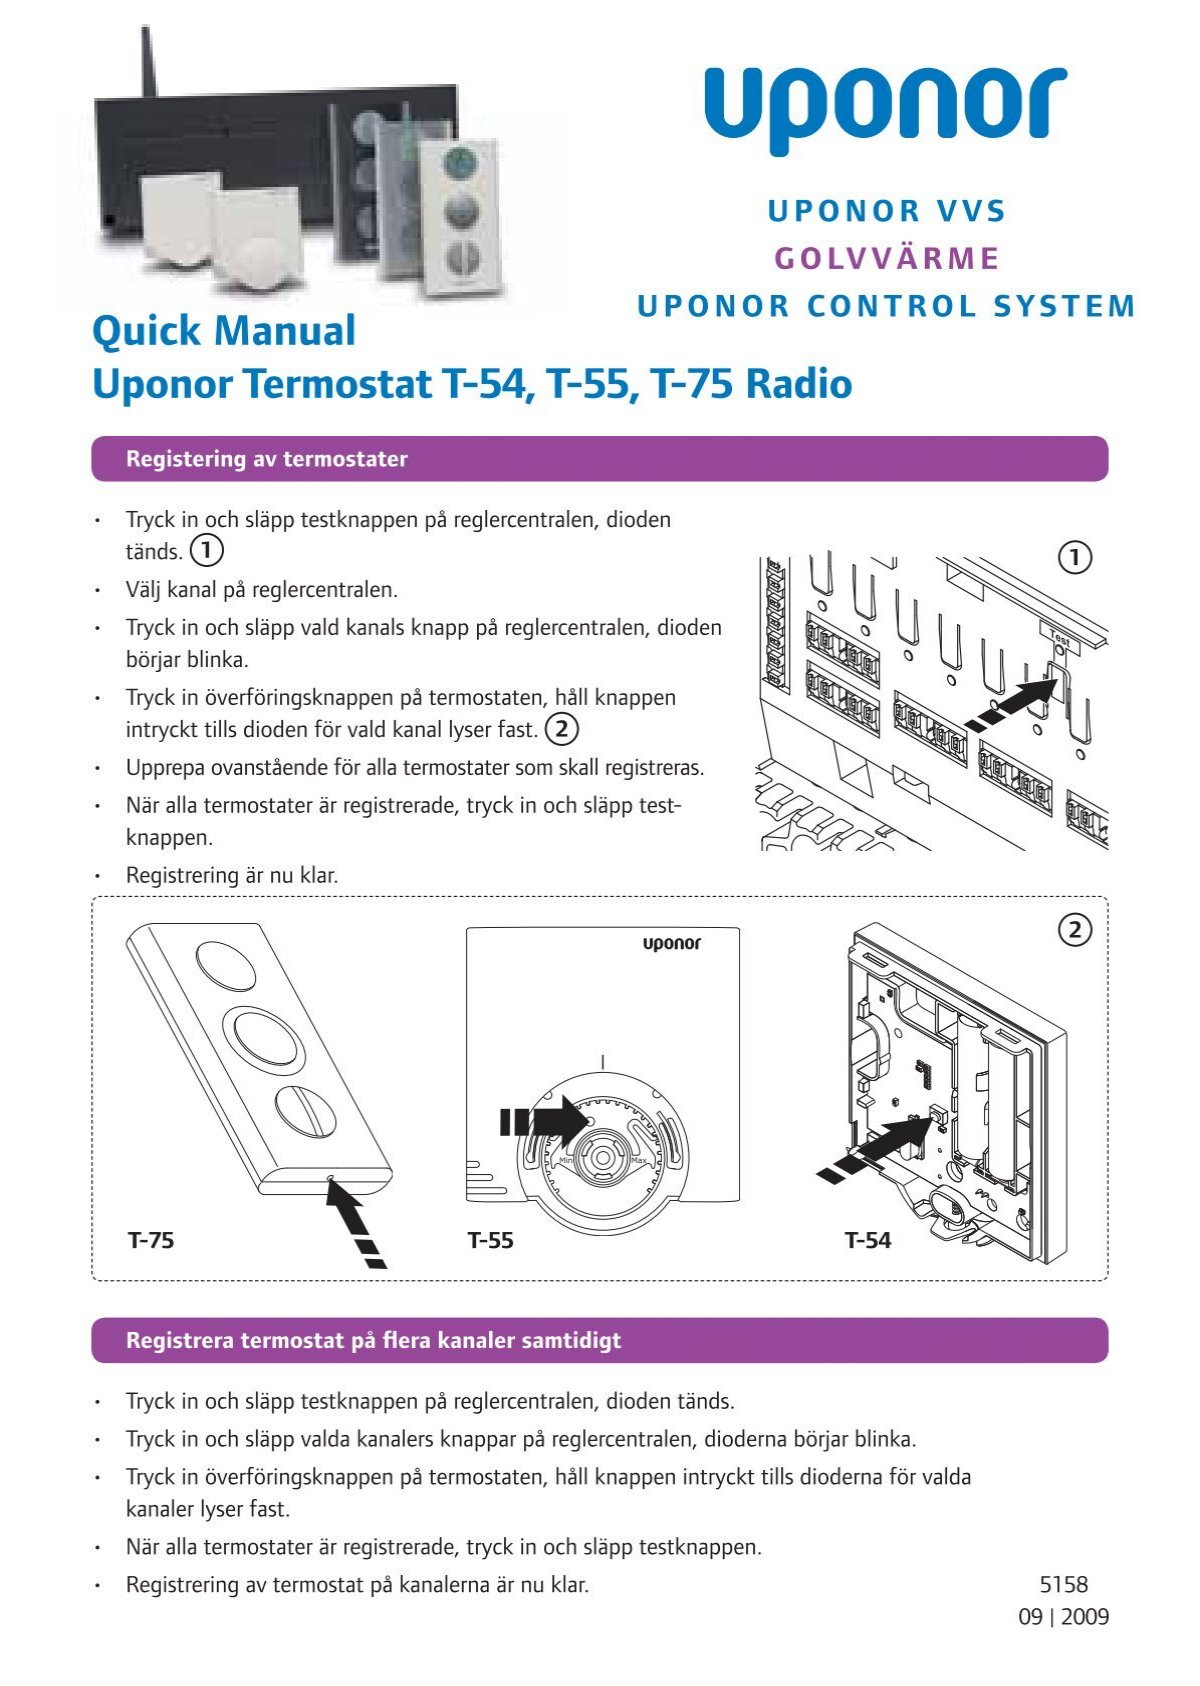 Quick Manual Uponor Termostat T-54, T-55, T-75 ... - Uponor